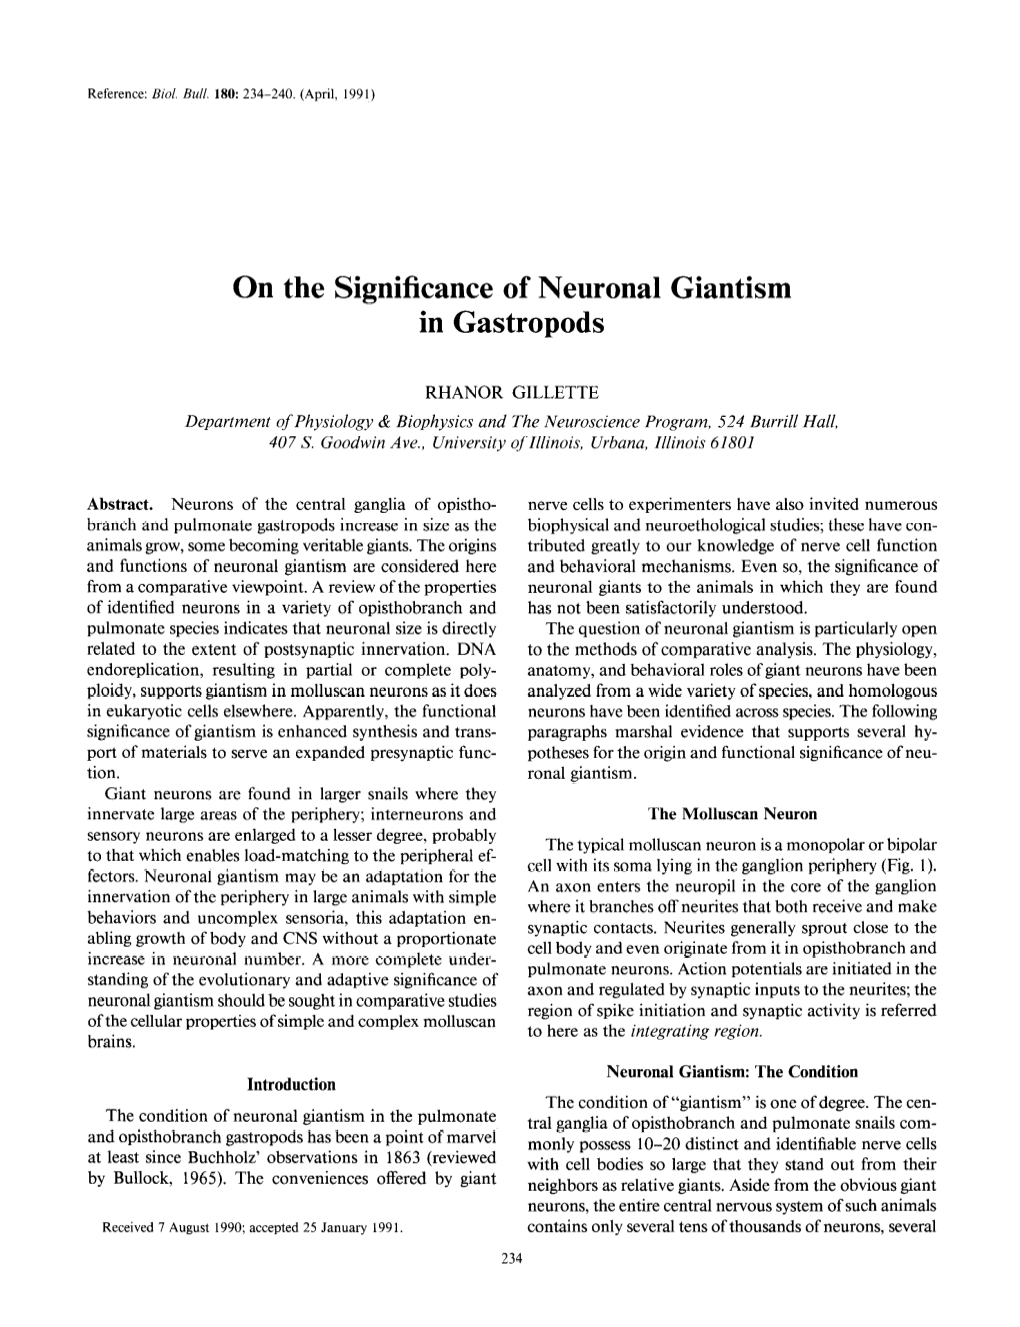 On the Significance of Neuronal Giantism in Gastropods